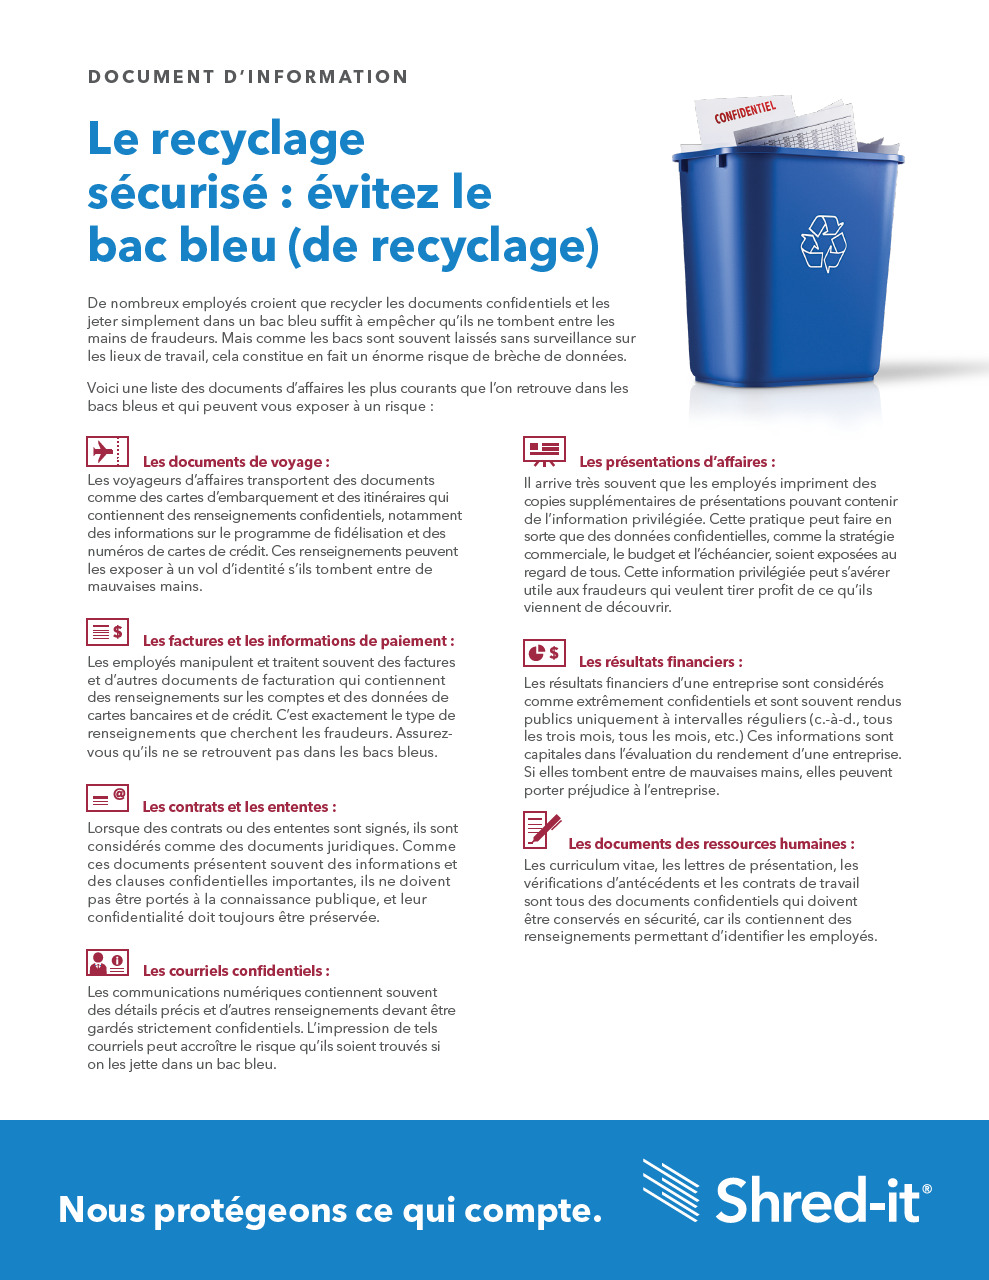 Shred-it-Secure-Recycling-Avoid-The-Blue-Bin-French.pdf